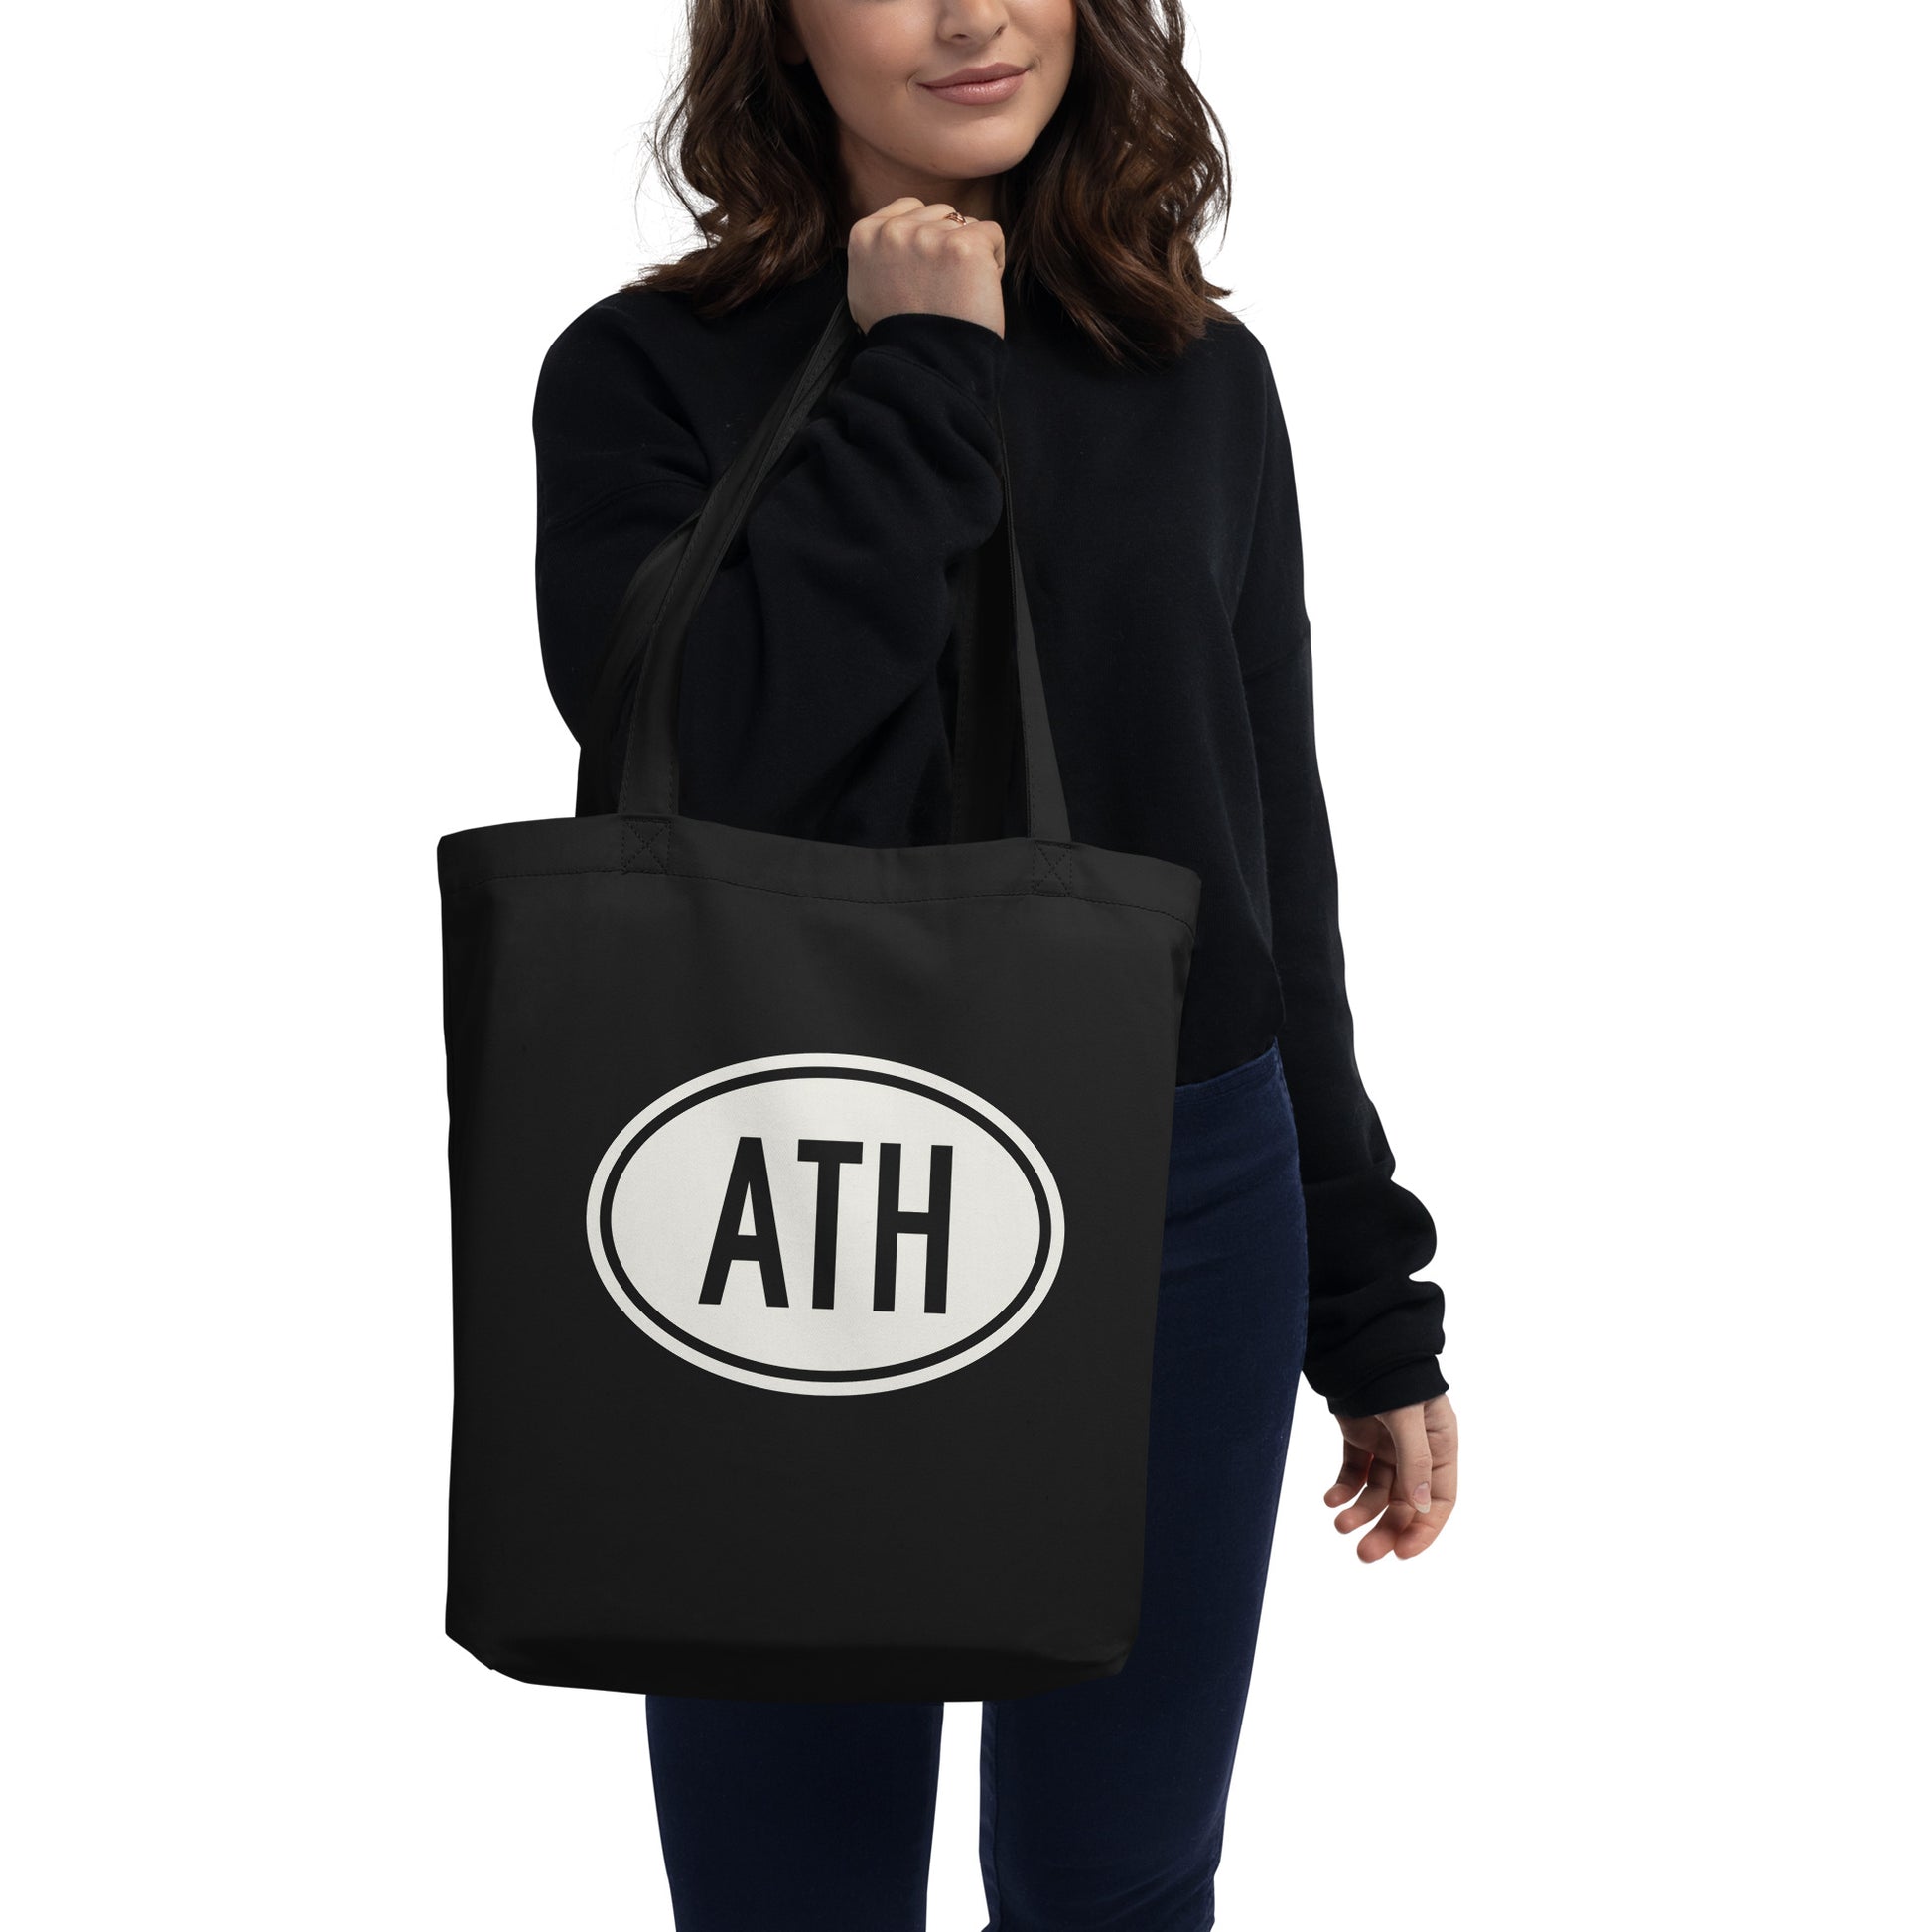 Unique Travel Gift Organic Tote - White Oval • ATH Athens • YHM Designs - Image 03